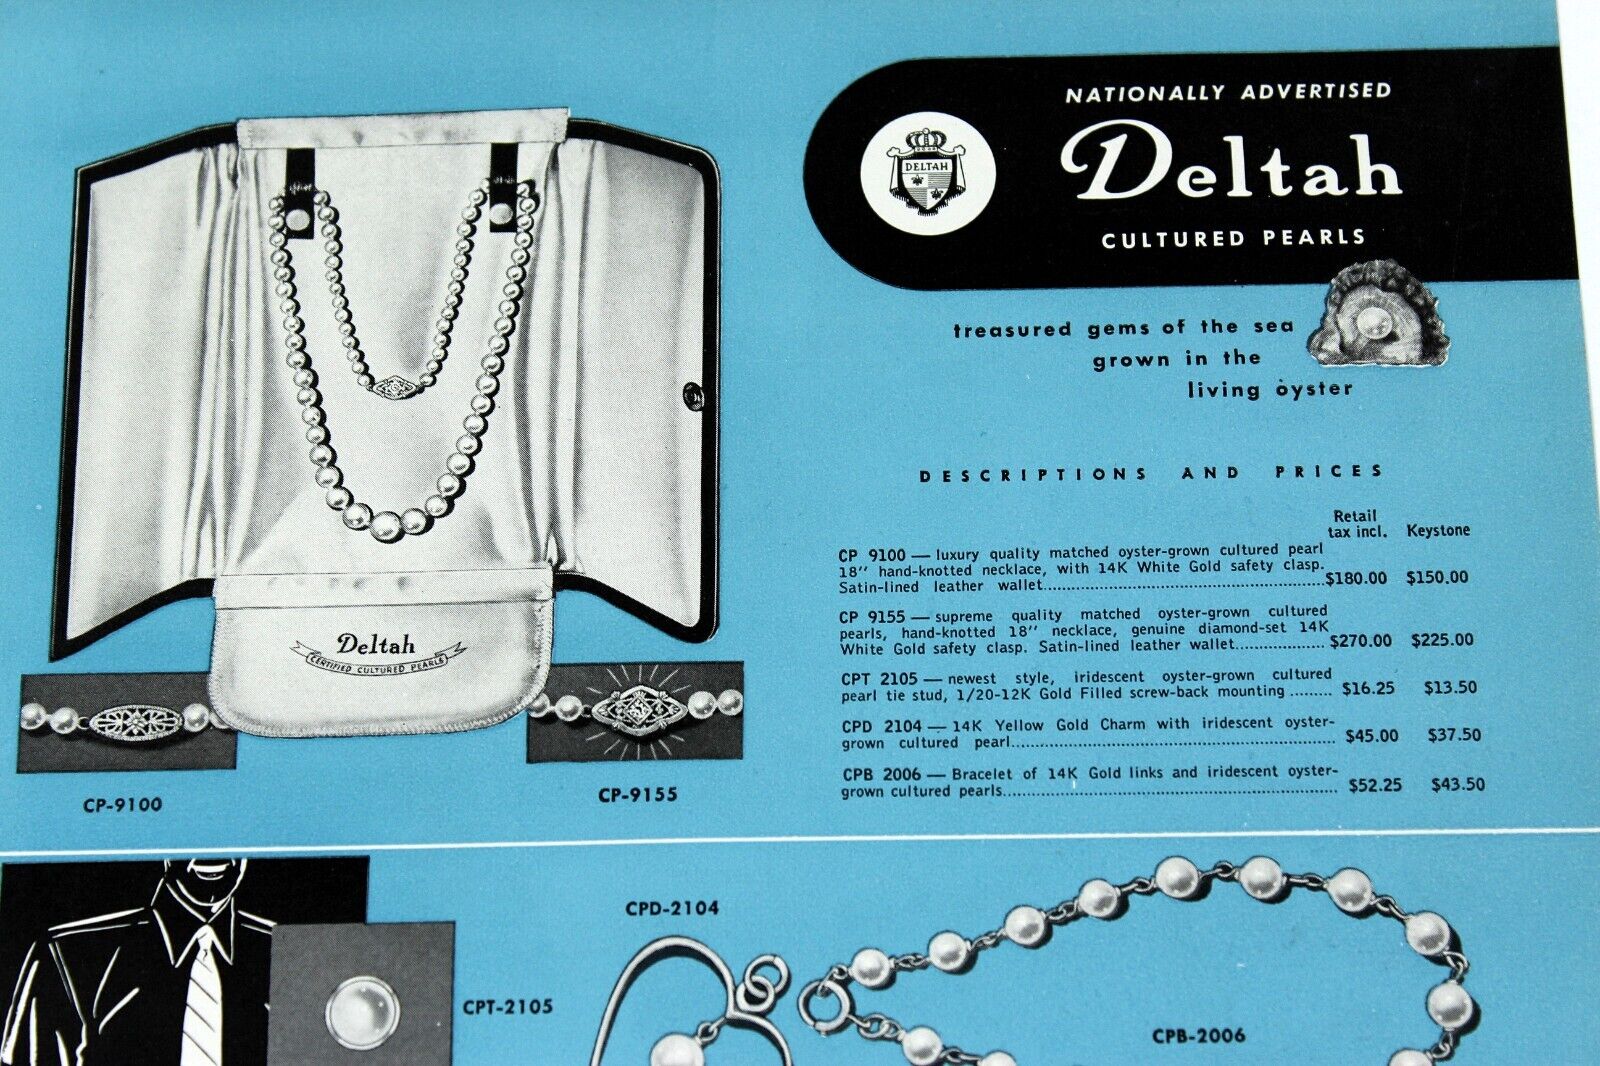 Vintage 1952 DELTAH Cultured Pearls Print Ad in Color with Prices